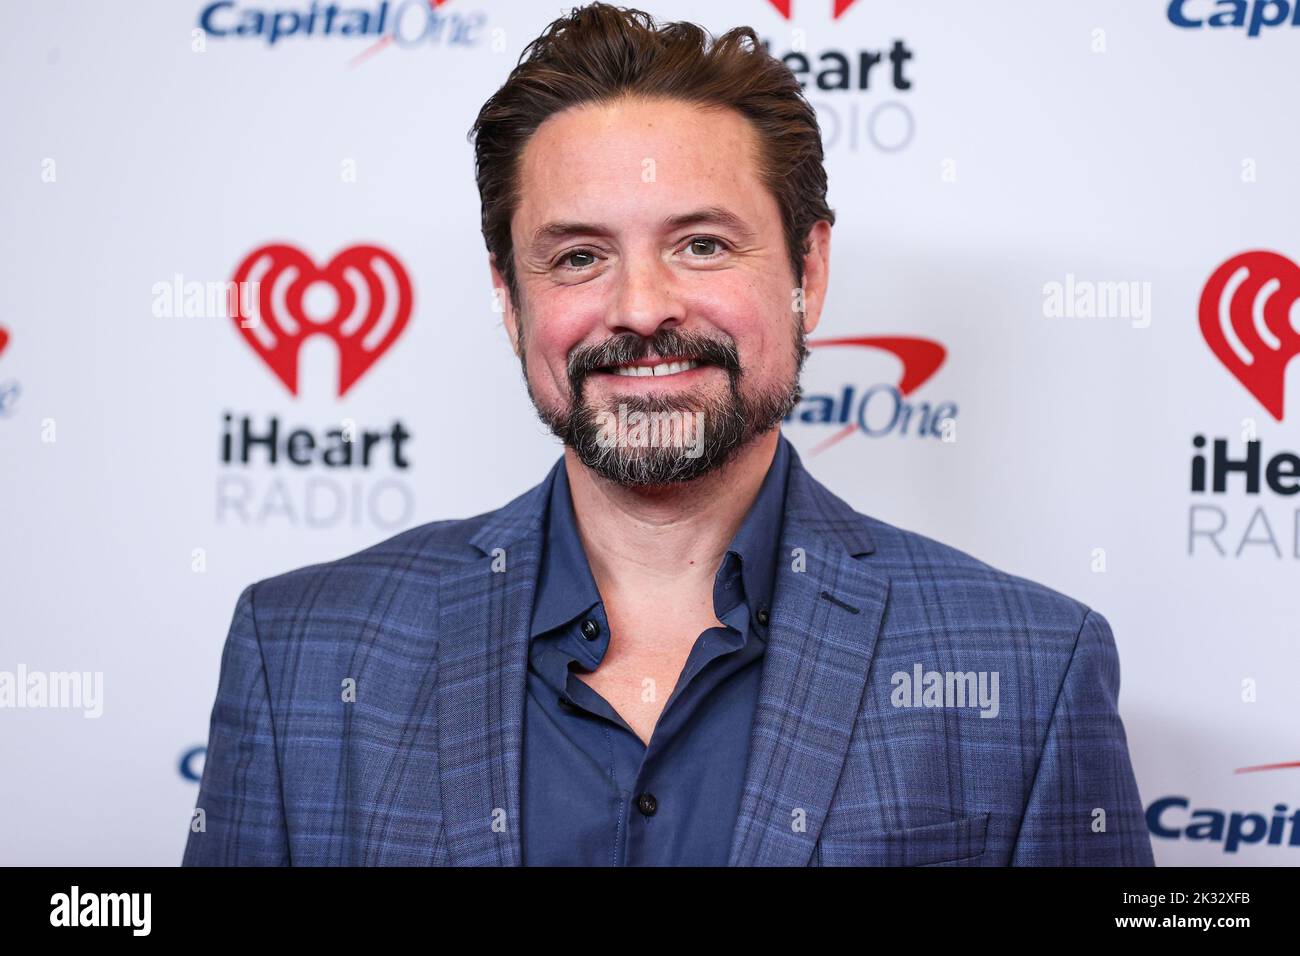 Las Vegas, United States. 23rd Sep, 2022. LAS VEGAS, NEVADA, USA - SEPTEMBER 23: Will Friedle poses in the press room at the 2022 iHeartRadio Music Festival - Night 1 held at the T-Mobile Arena on September 23, 2022 in Las Vegas, Nevada, United States. (Photo by Xavier Collin/Image Press Agency) Credit: Image Press Agency/Alamy Live News Stock Photo